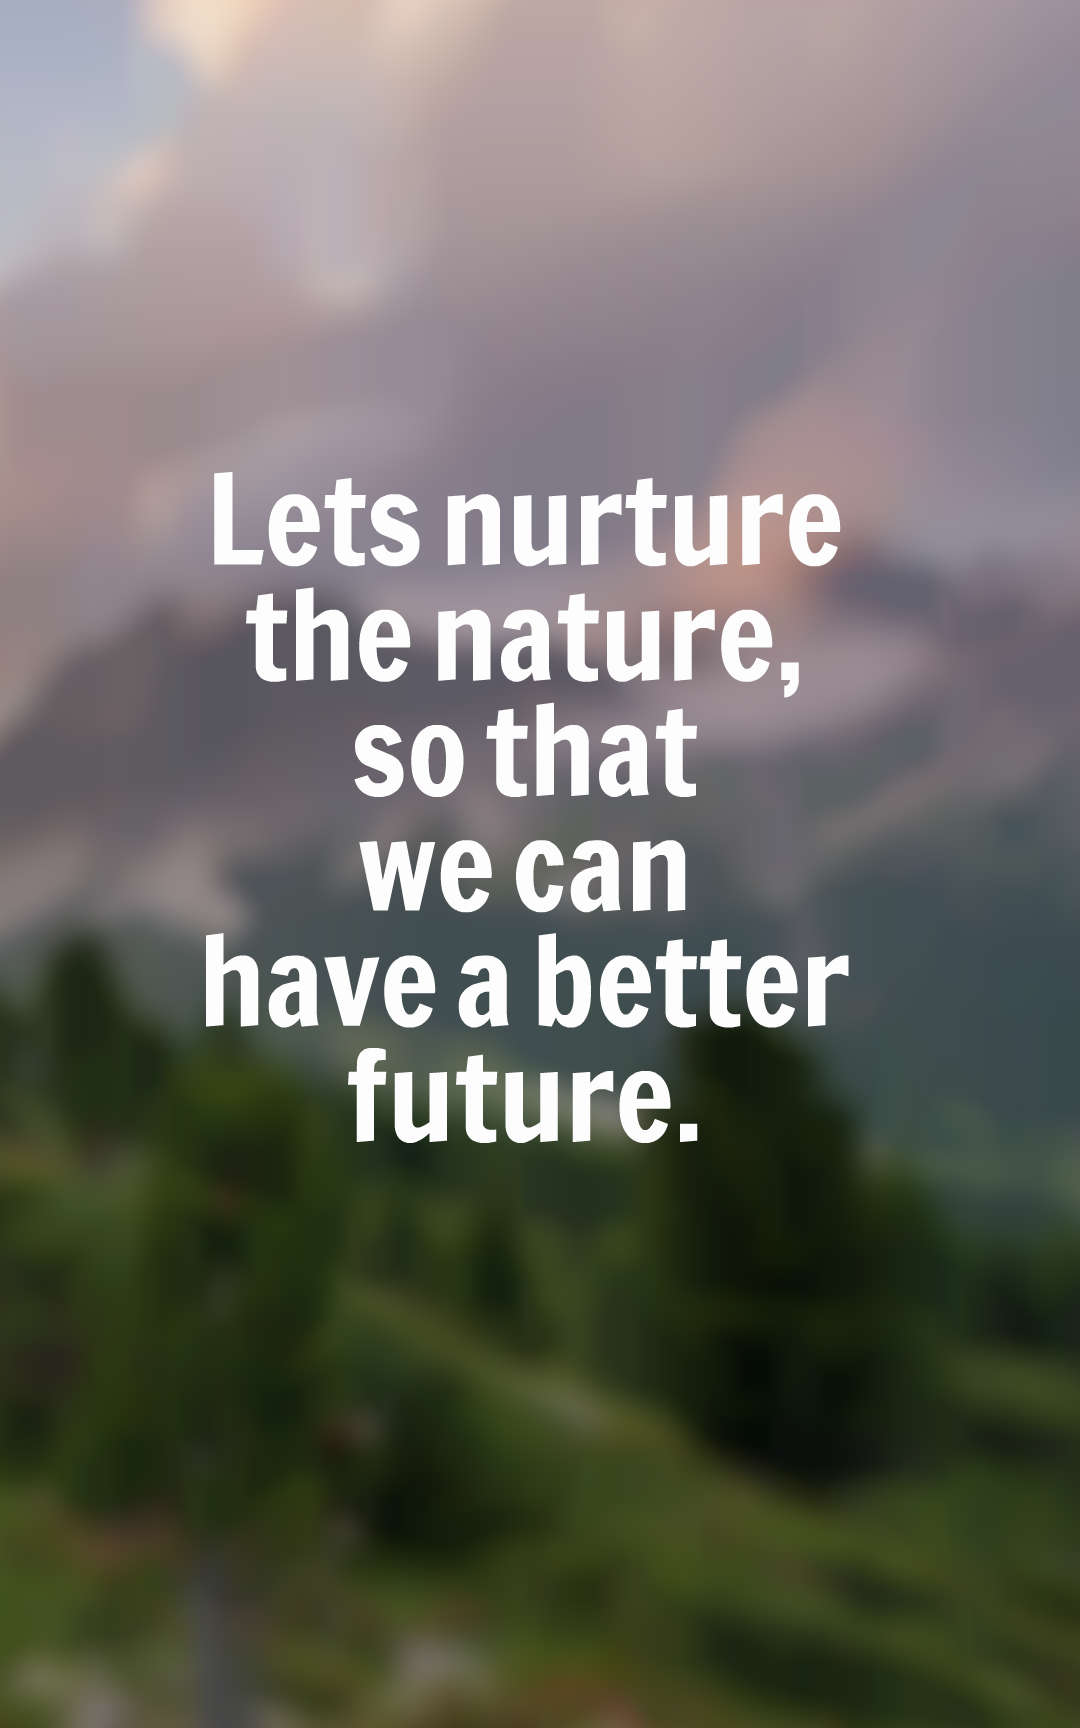 Lets nurture the nature so that we can have a better future.